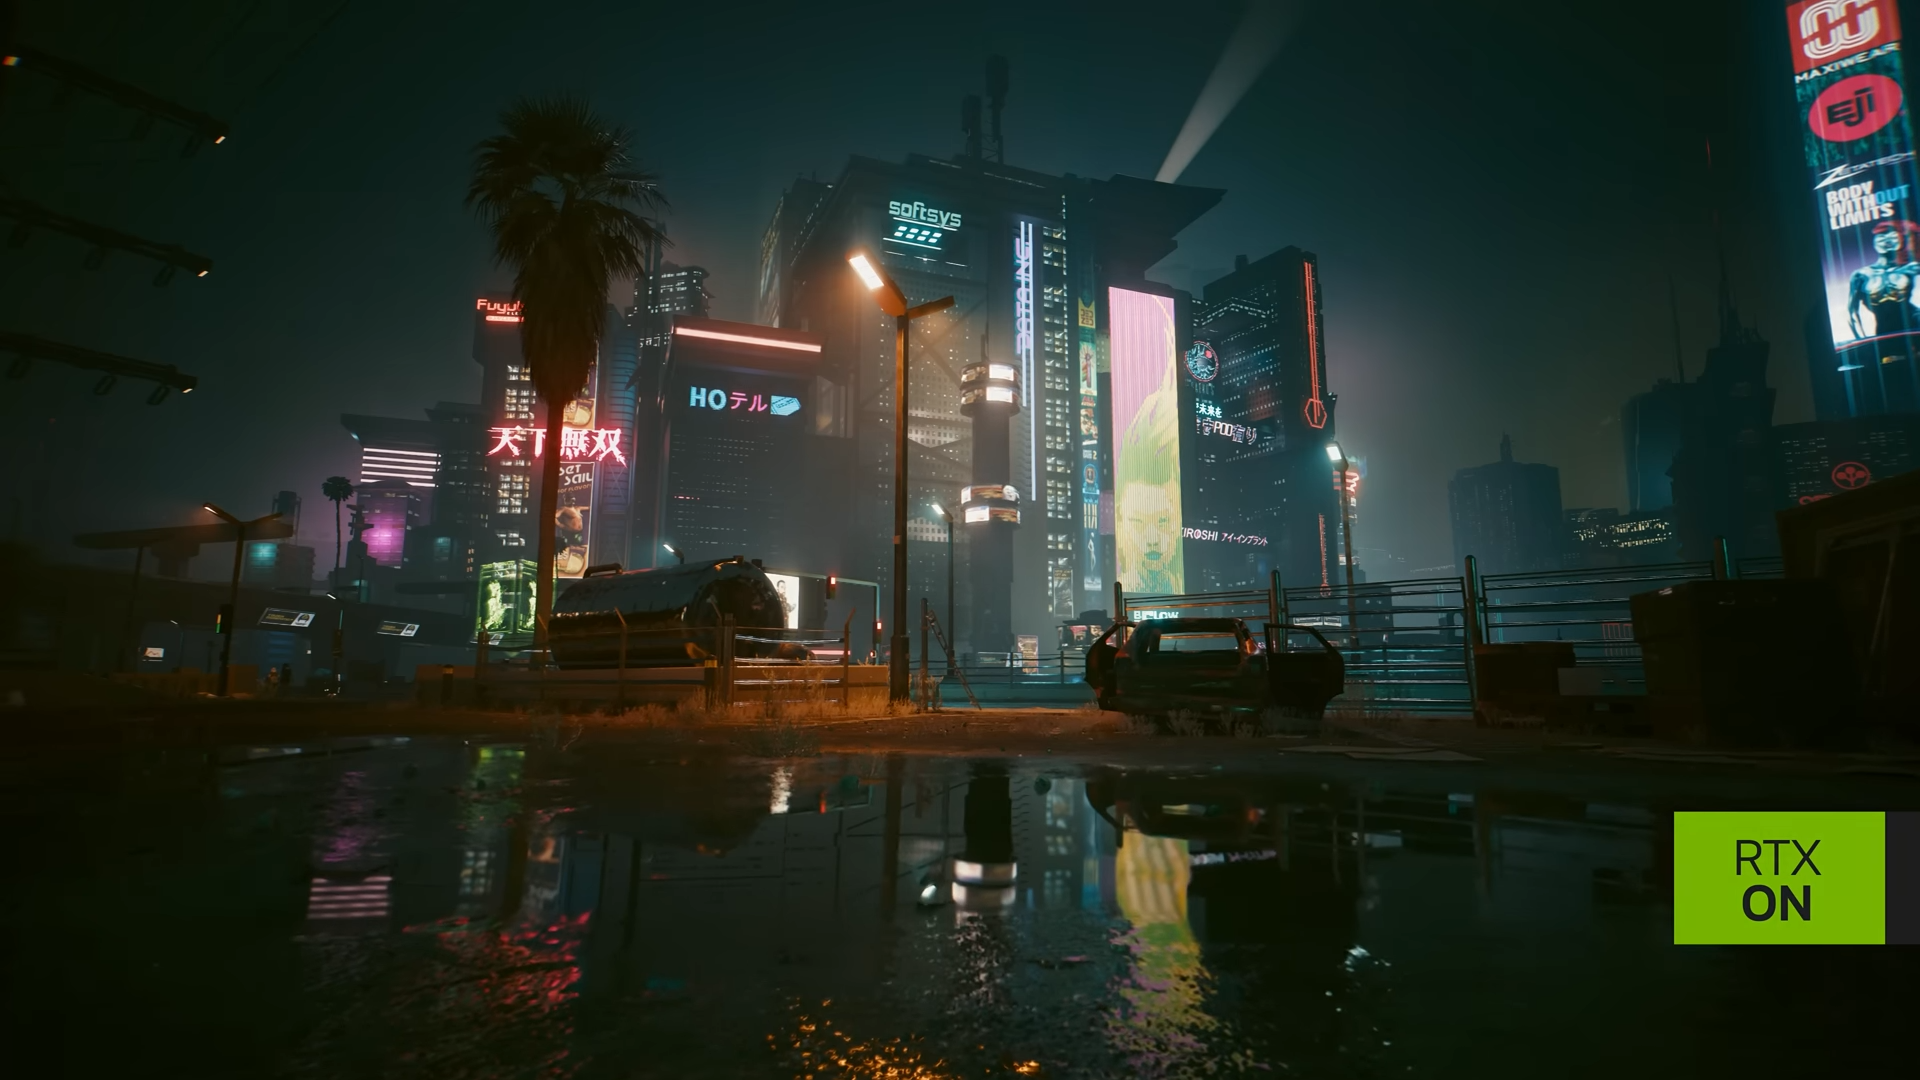 Cyberpunk 2077 update adds RT: Overdrive Mode, but your PC probably can't  handle it